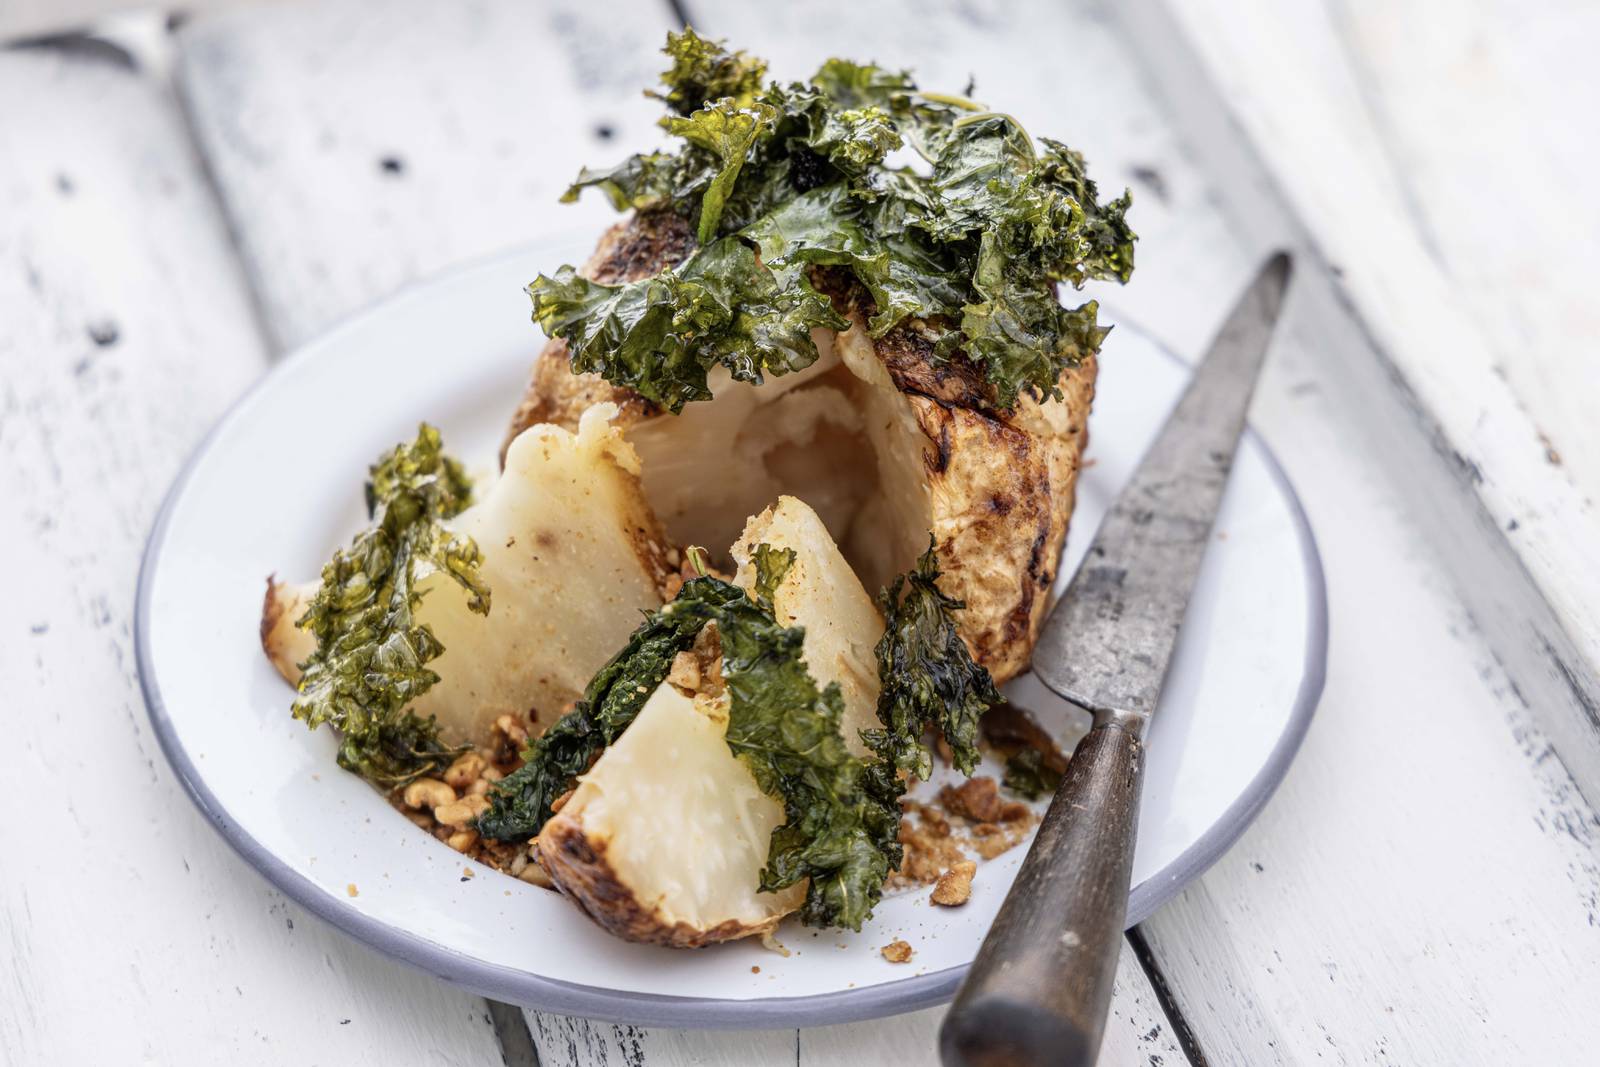 Whole roasted celeriac with brown butter and hazelnut – The Irish Times